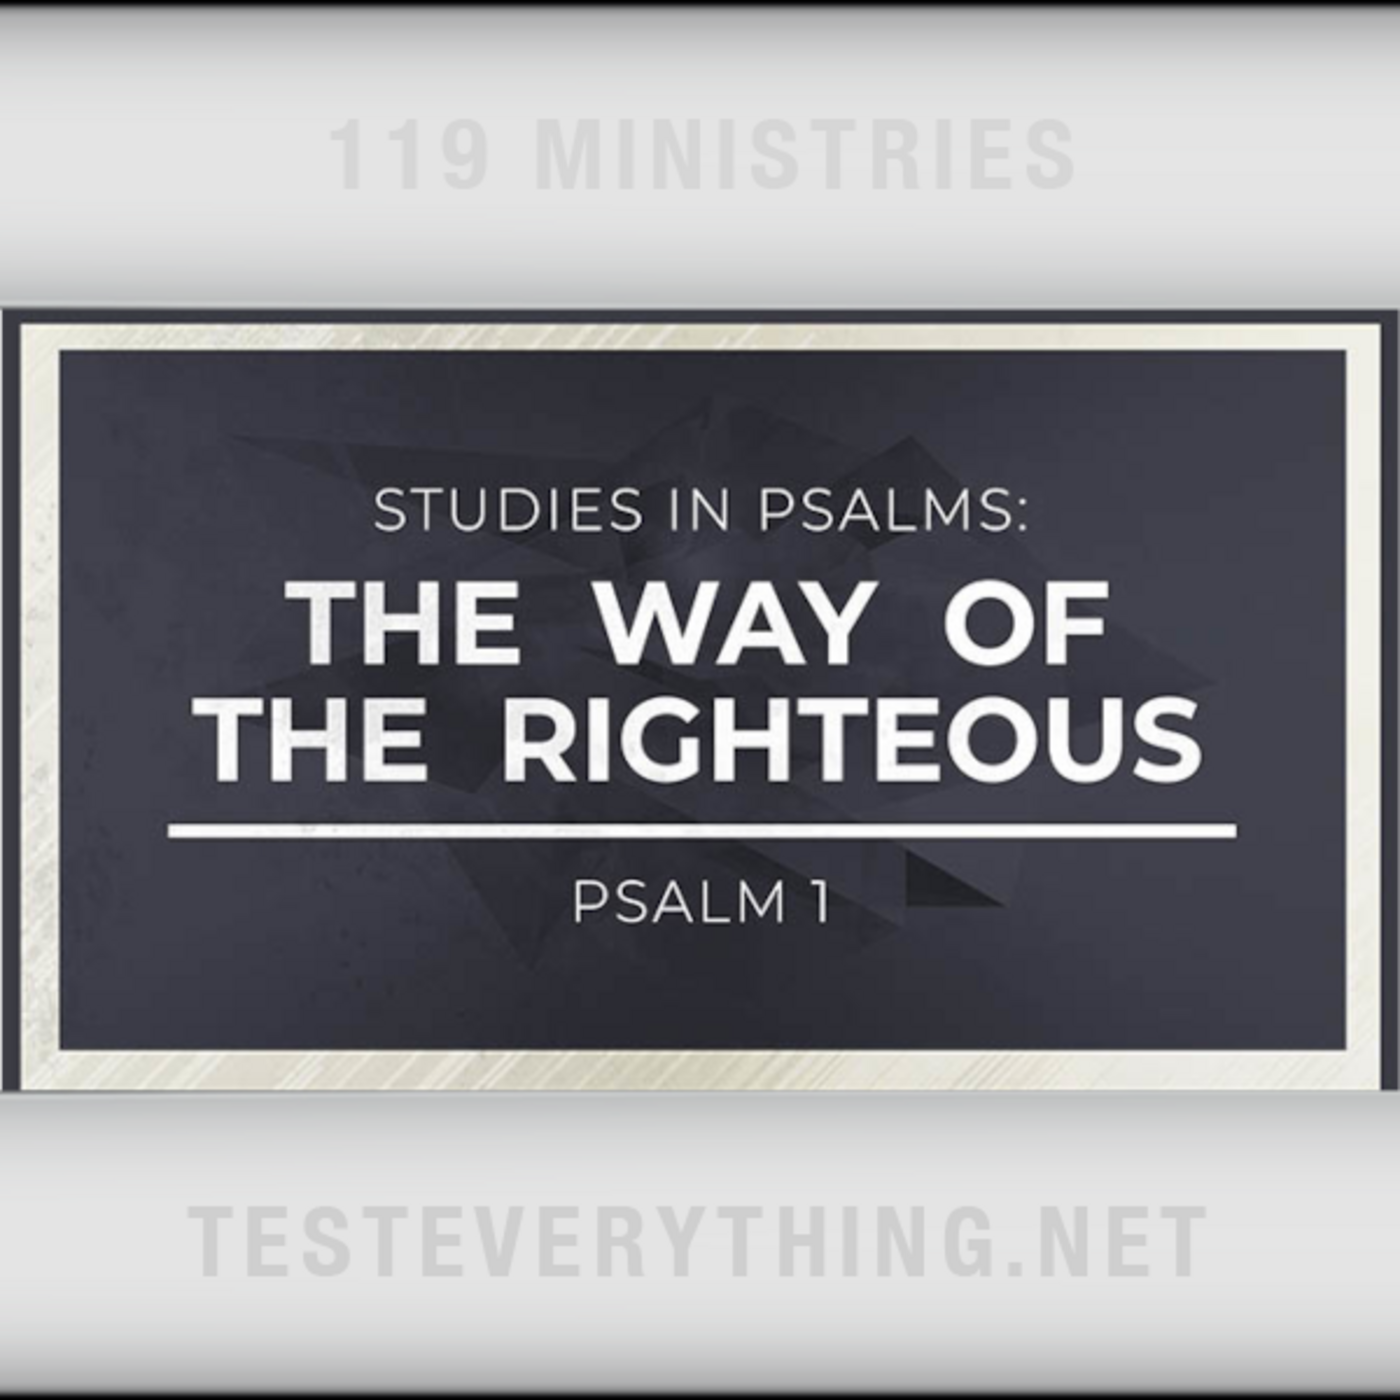 Episode 522: BS: Studies in Psalms - The Way of the Righteous (Psalm 1)